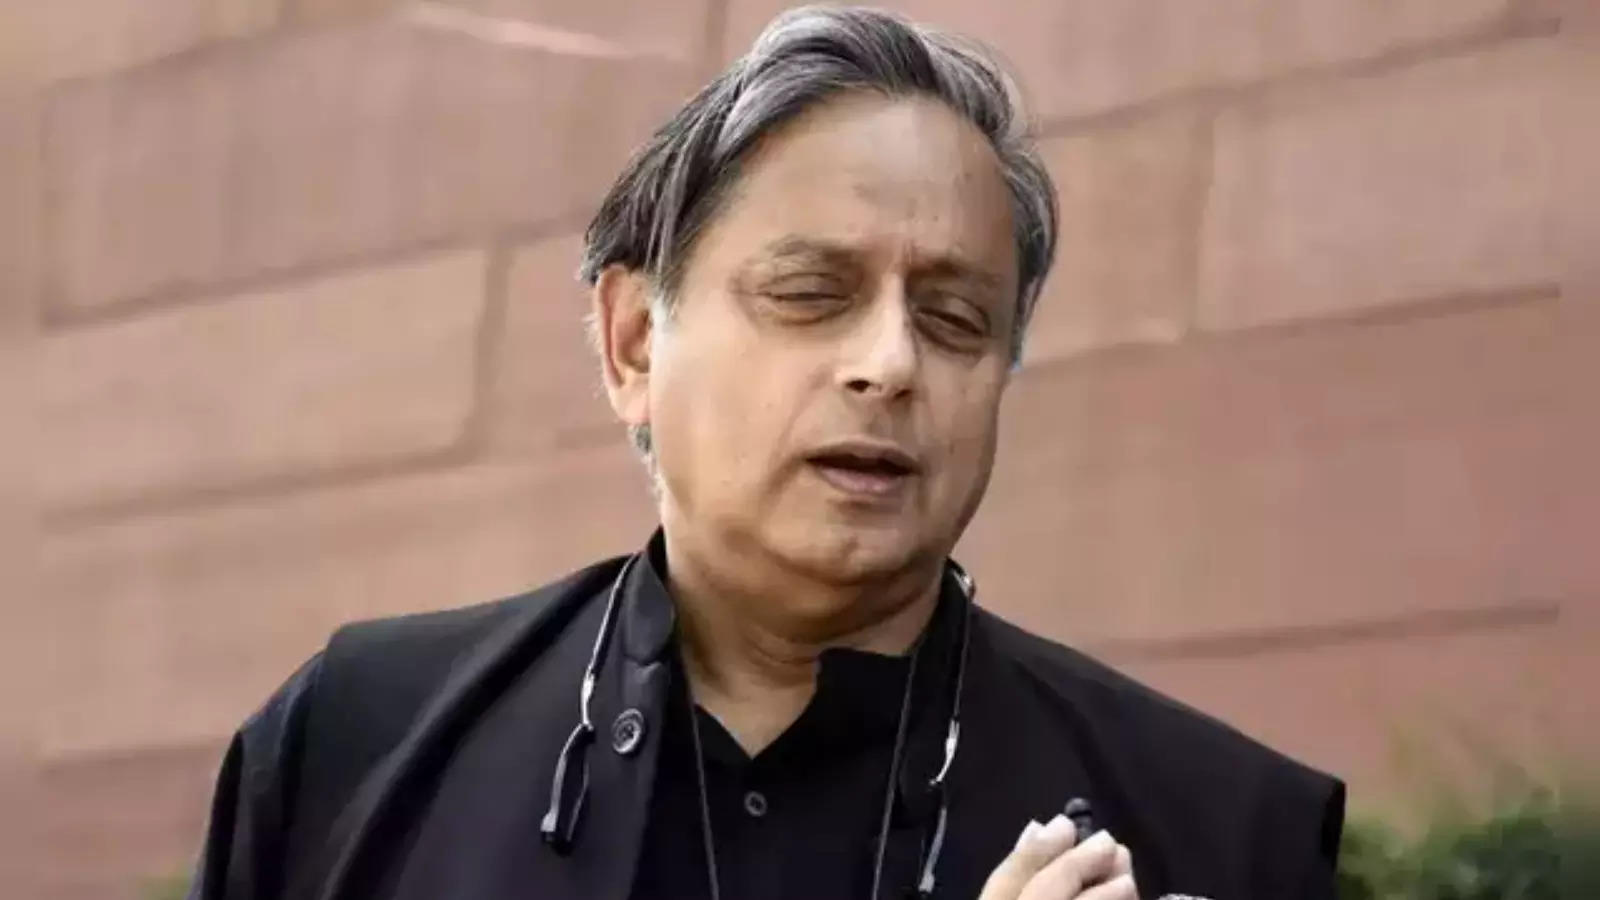 Shashi Tharoor got into trouble for calling Swati Maliwal case a gossip, BJP said- the statement will cost him dearly